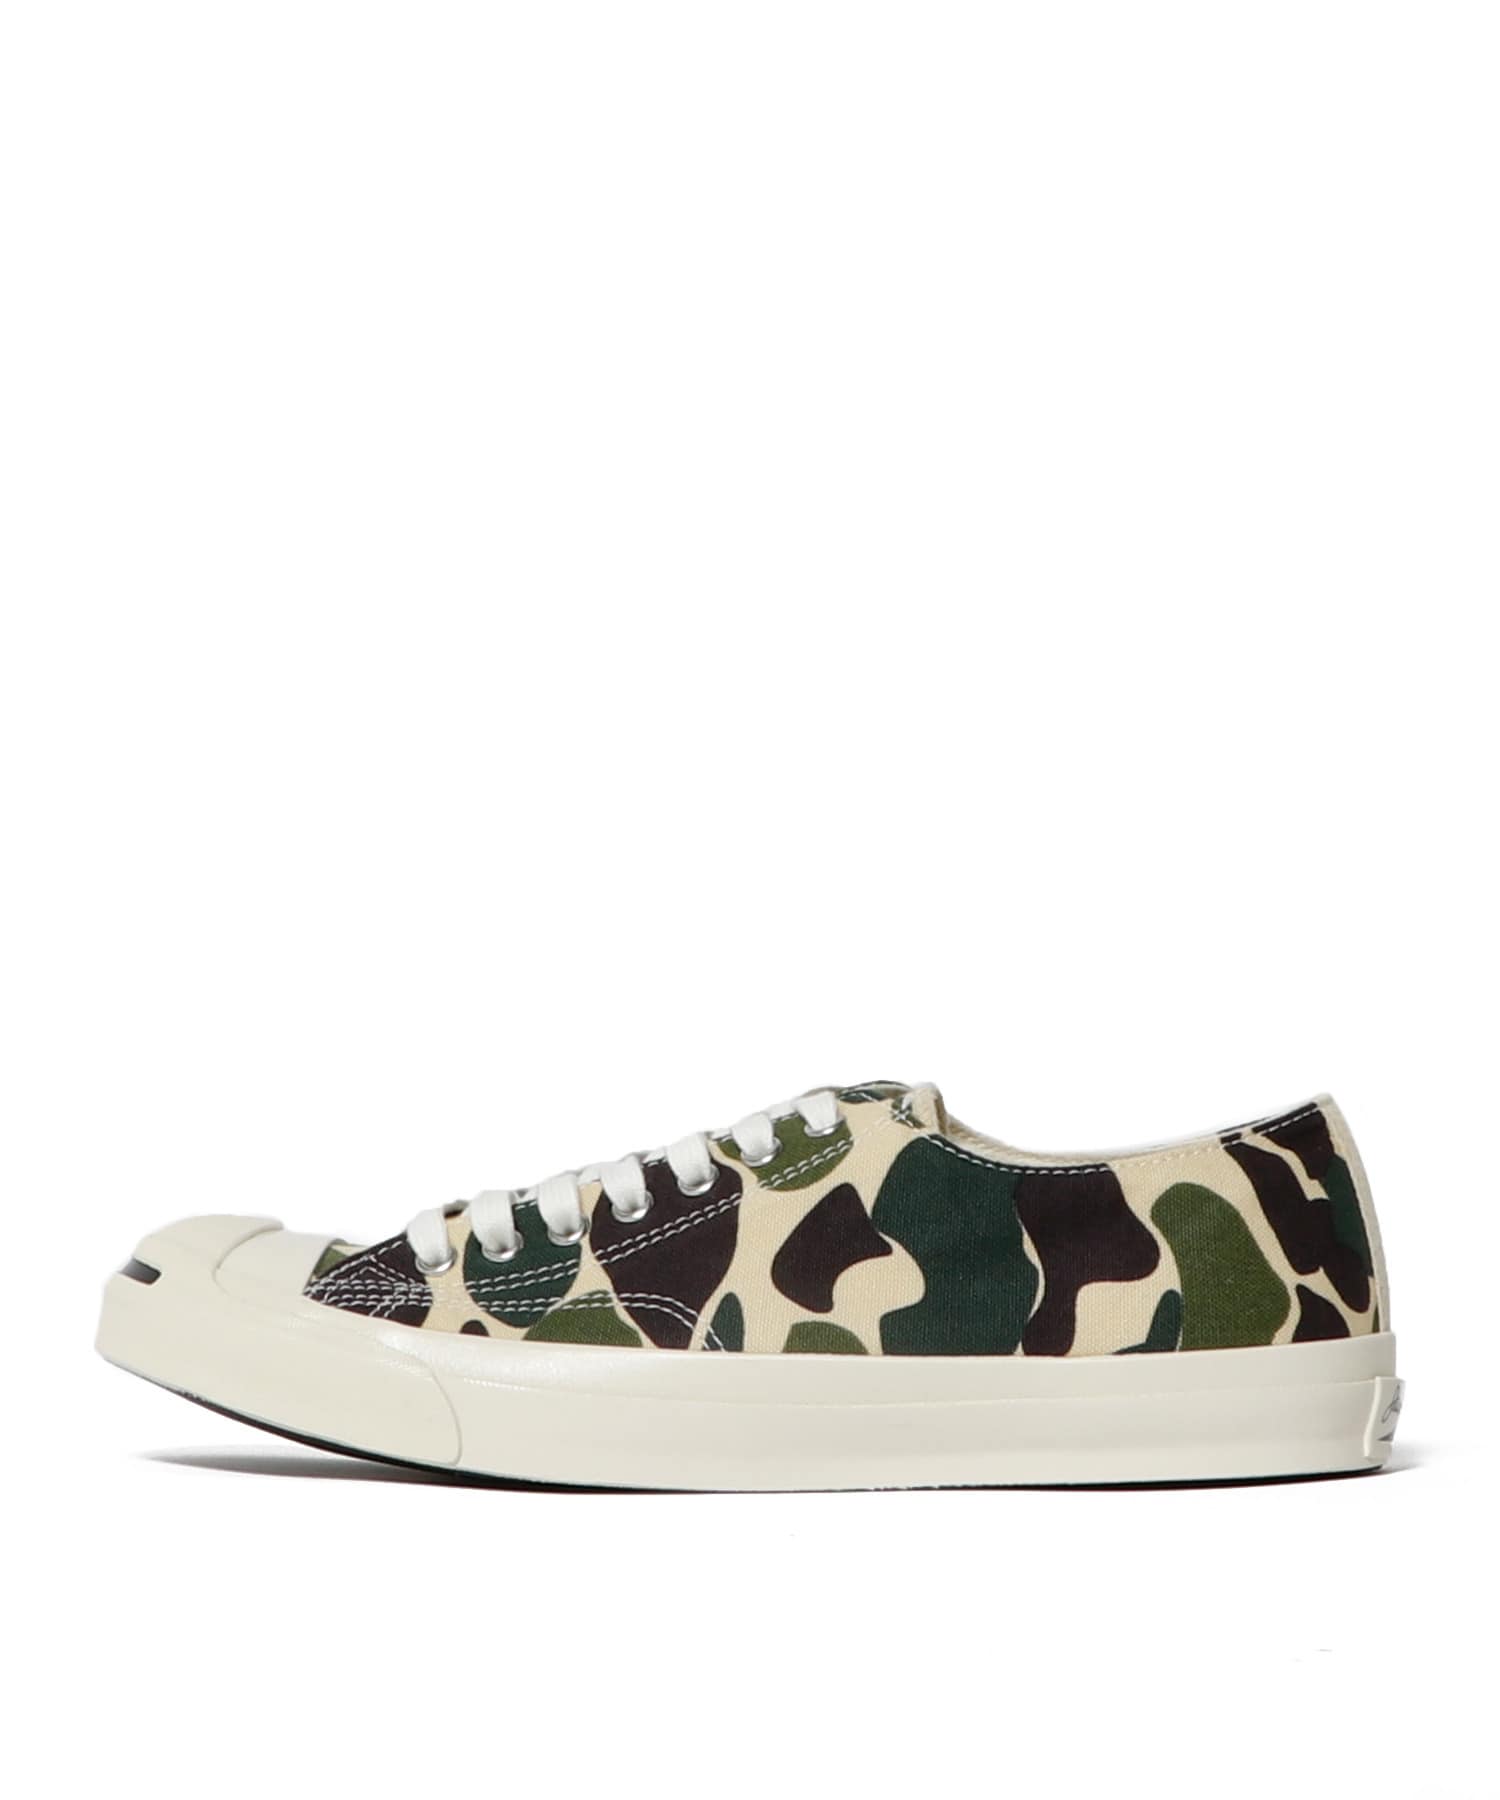 CONVERSE / JACK PURCELL US 83CAMO